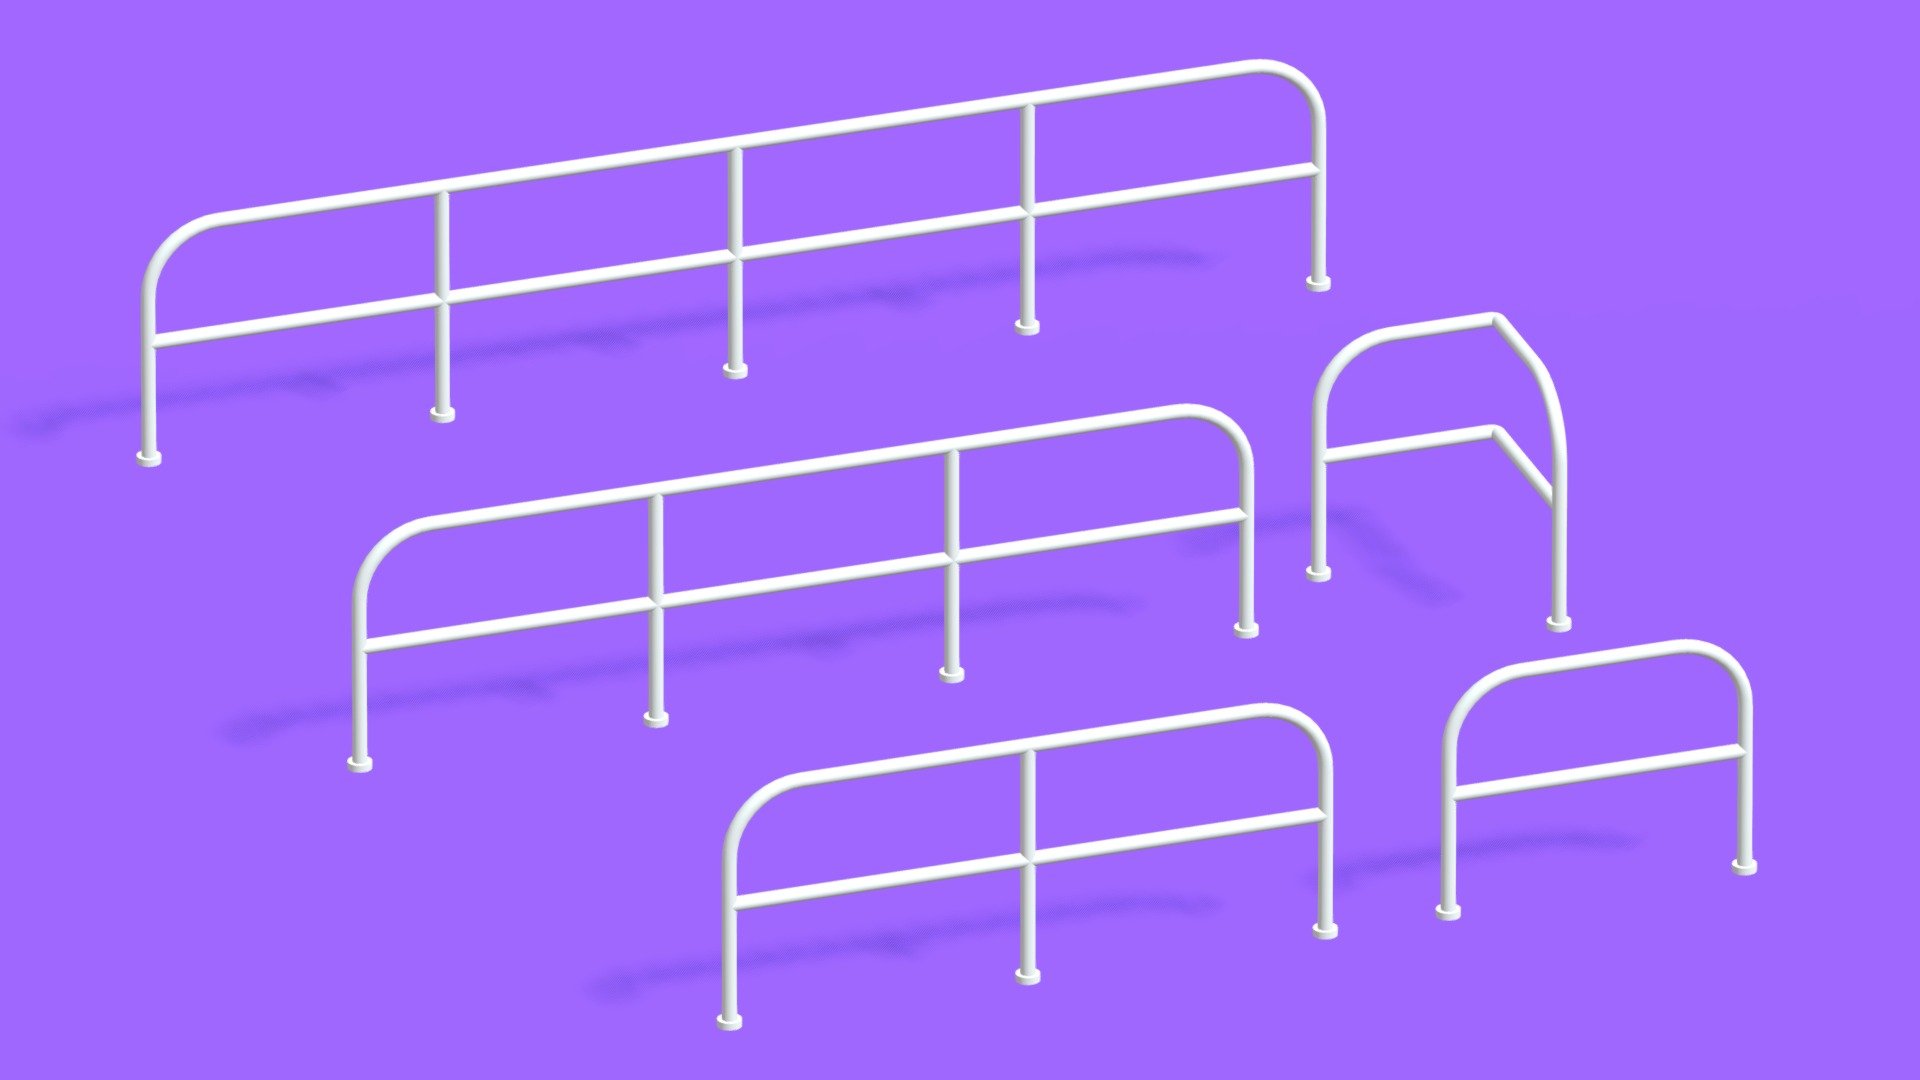 -Railing Collection.

-This product contains 5 objects.

-Vert: 5,850 poly: 5,336.

-Objects and Materials have the correct names.

-This product was created in Blender 2.935.

-Formats: blend, fbx, obj, c4d, dae, abc, stl, u4d glb, unity.

-We hope you enjoy this model.

-Thank you 3d model